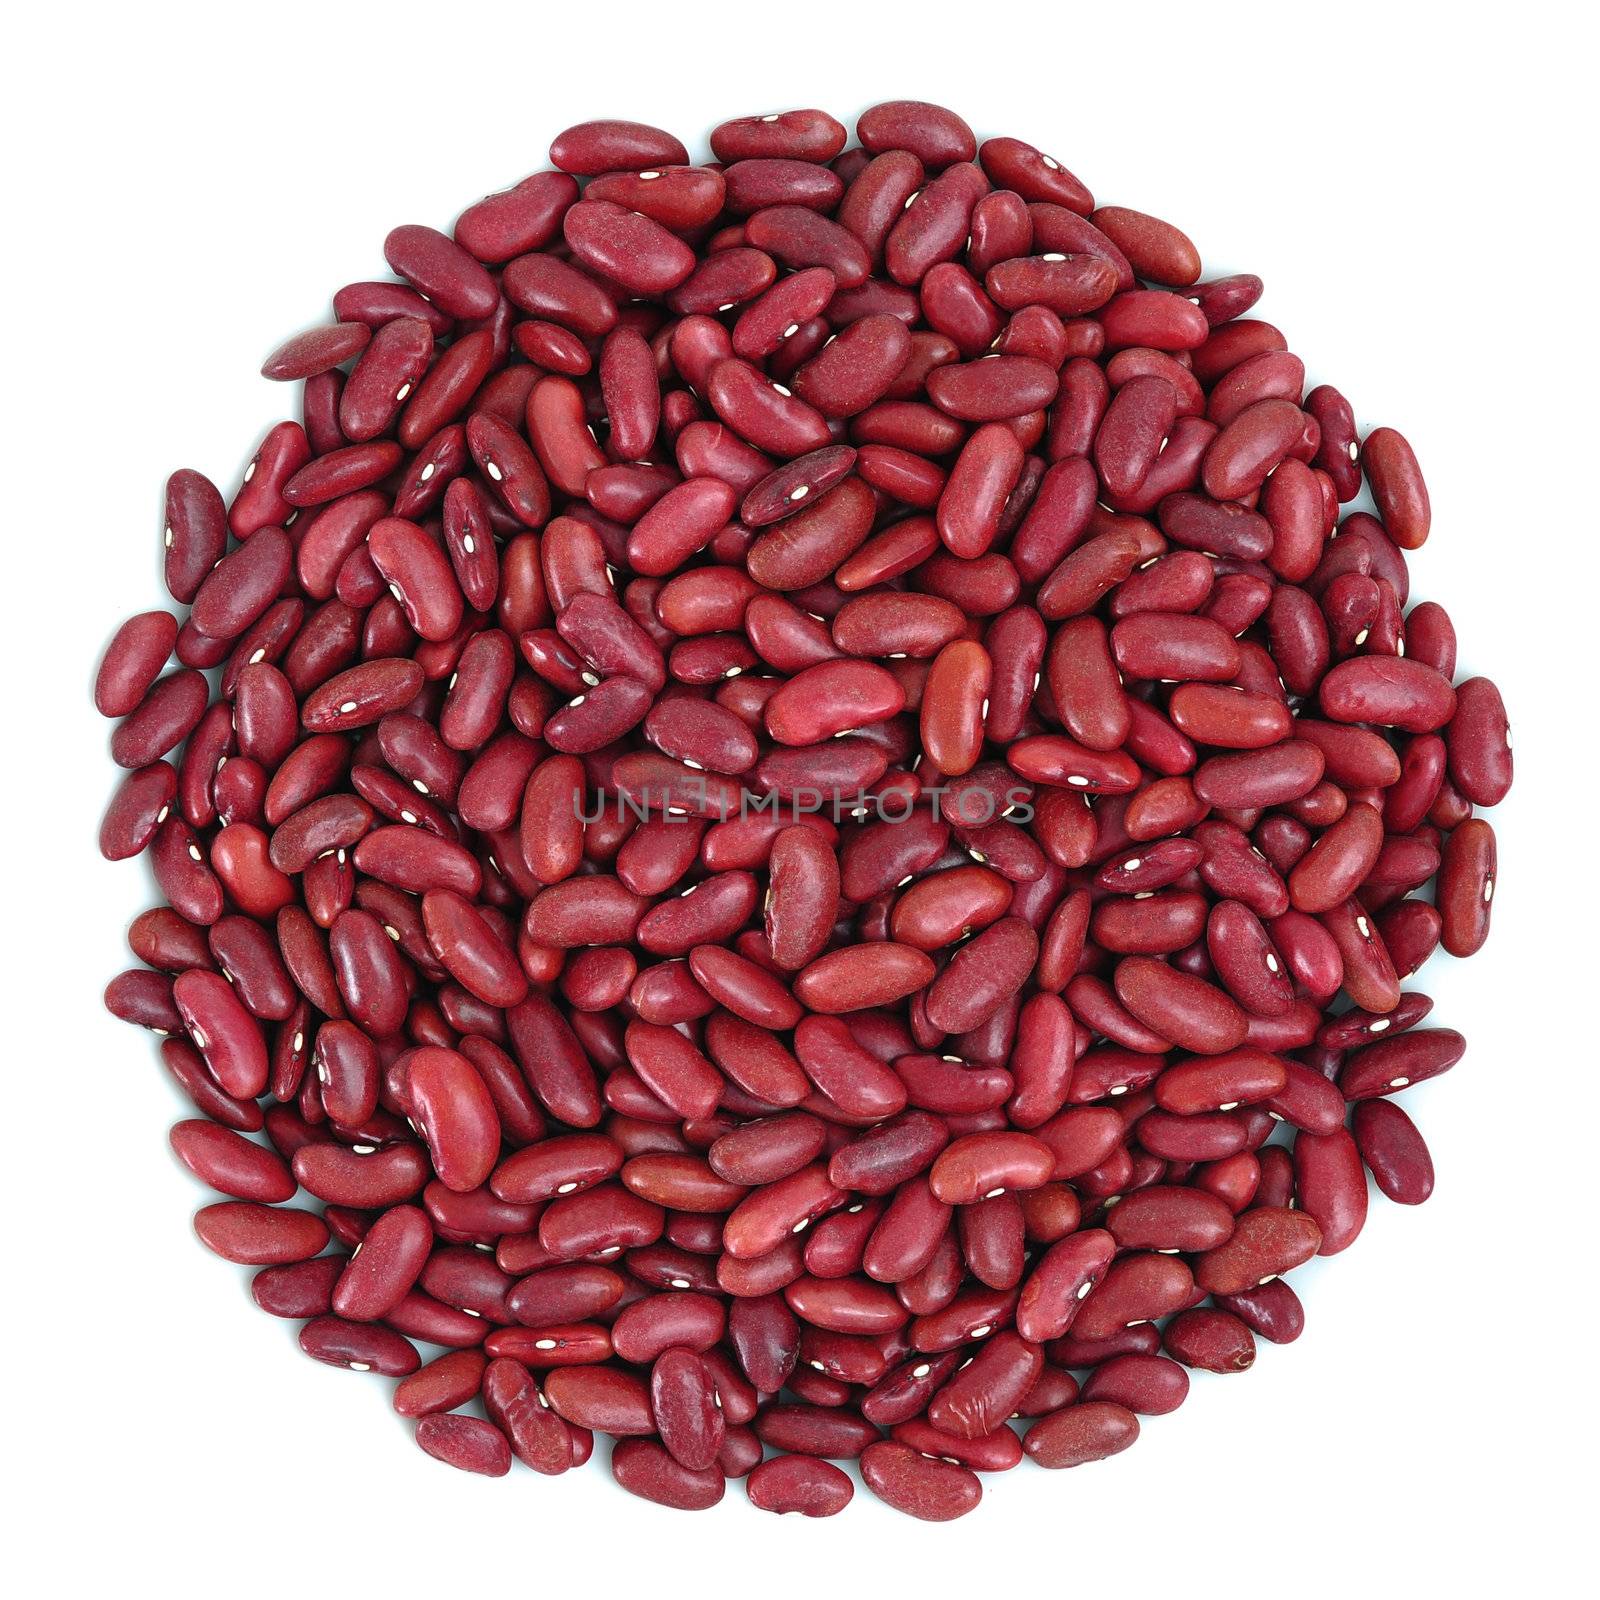 Red Kidney Beans by antpkr